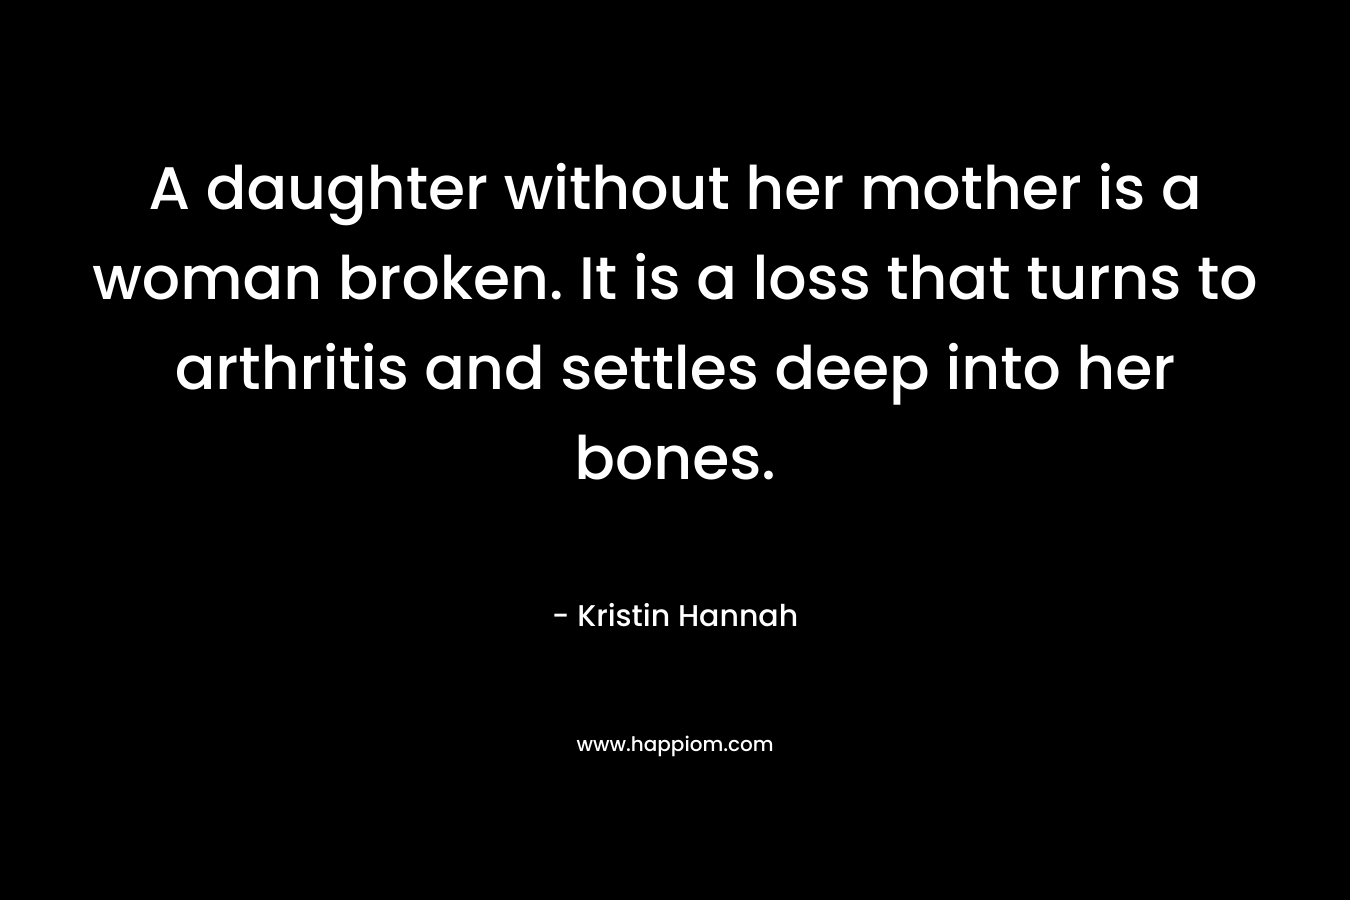 A daughter without her mother is a woman broken. It is a loss that turns to arthritis and settles deep into her bones. 